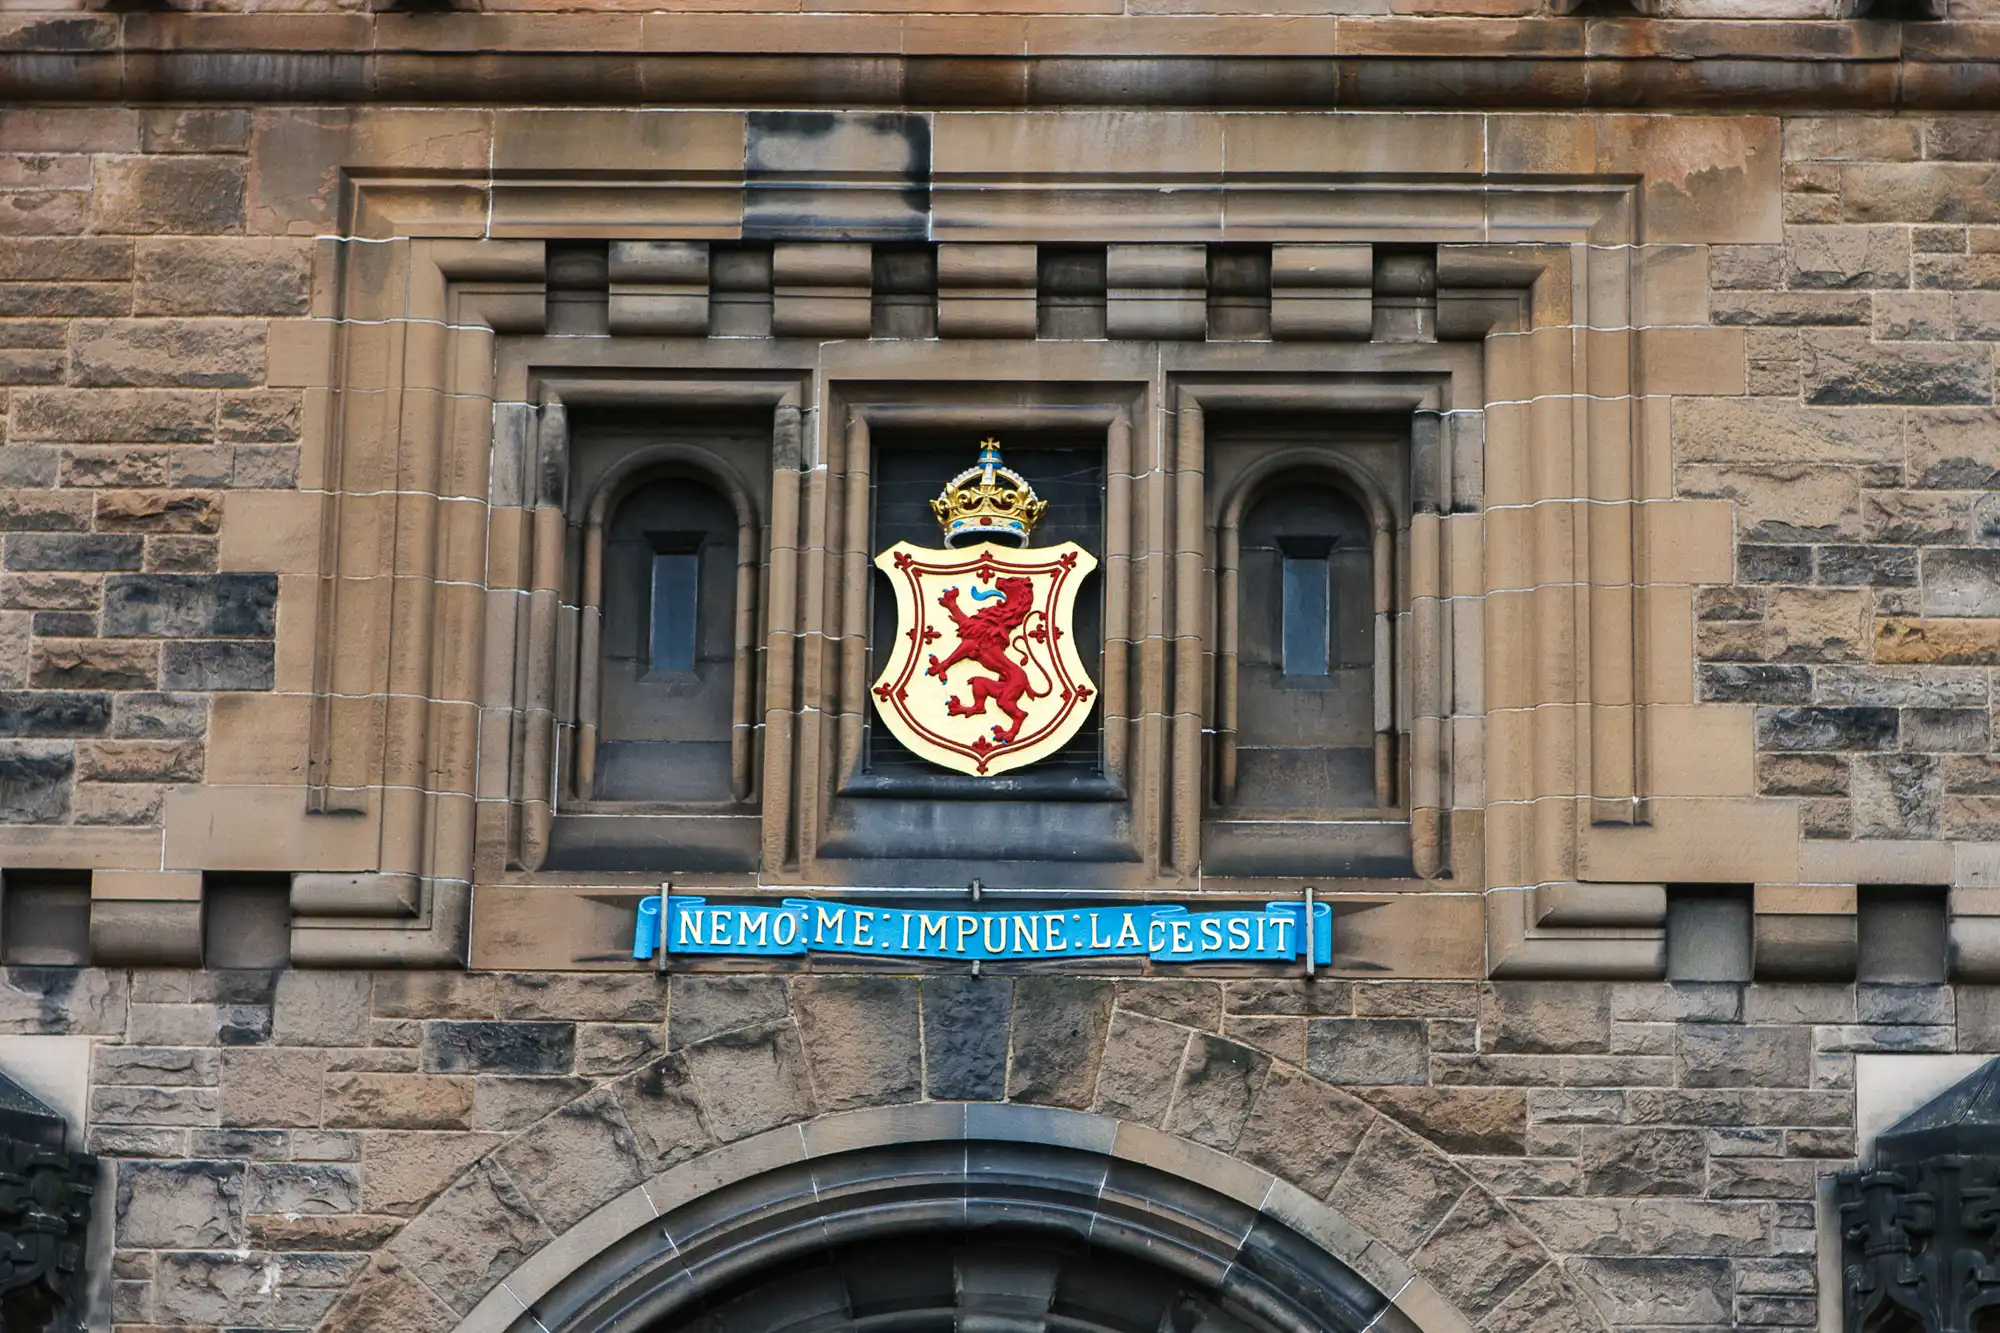 Stone facade of a building with a crest featuring a red lion and a banner reading "nemo me impune lacessit" above an arched doorway.